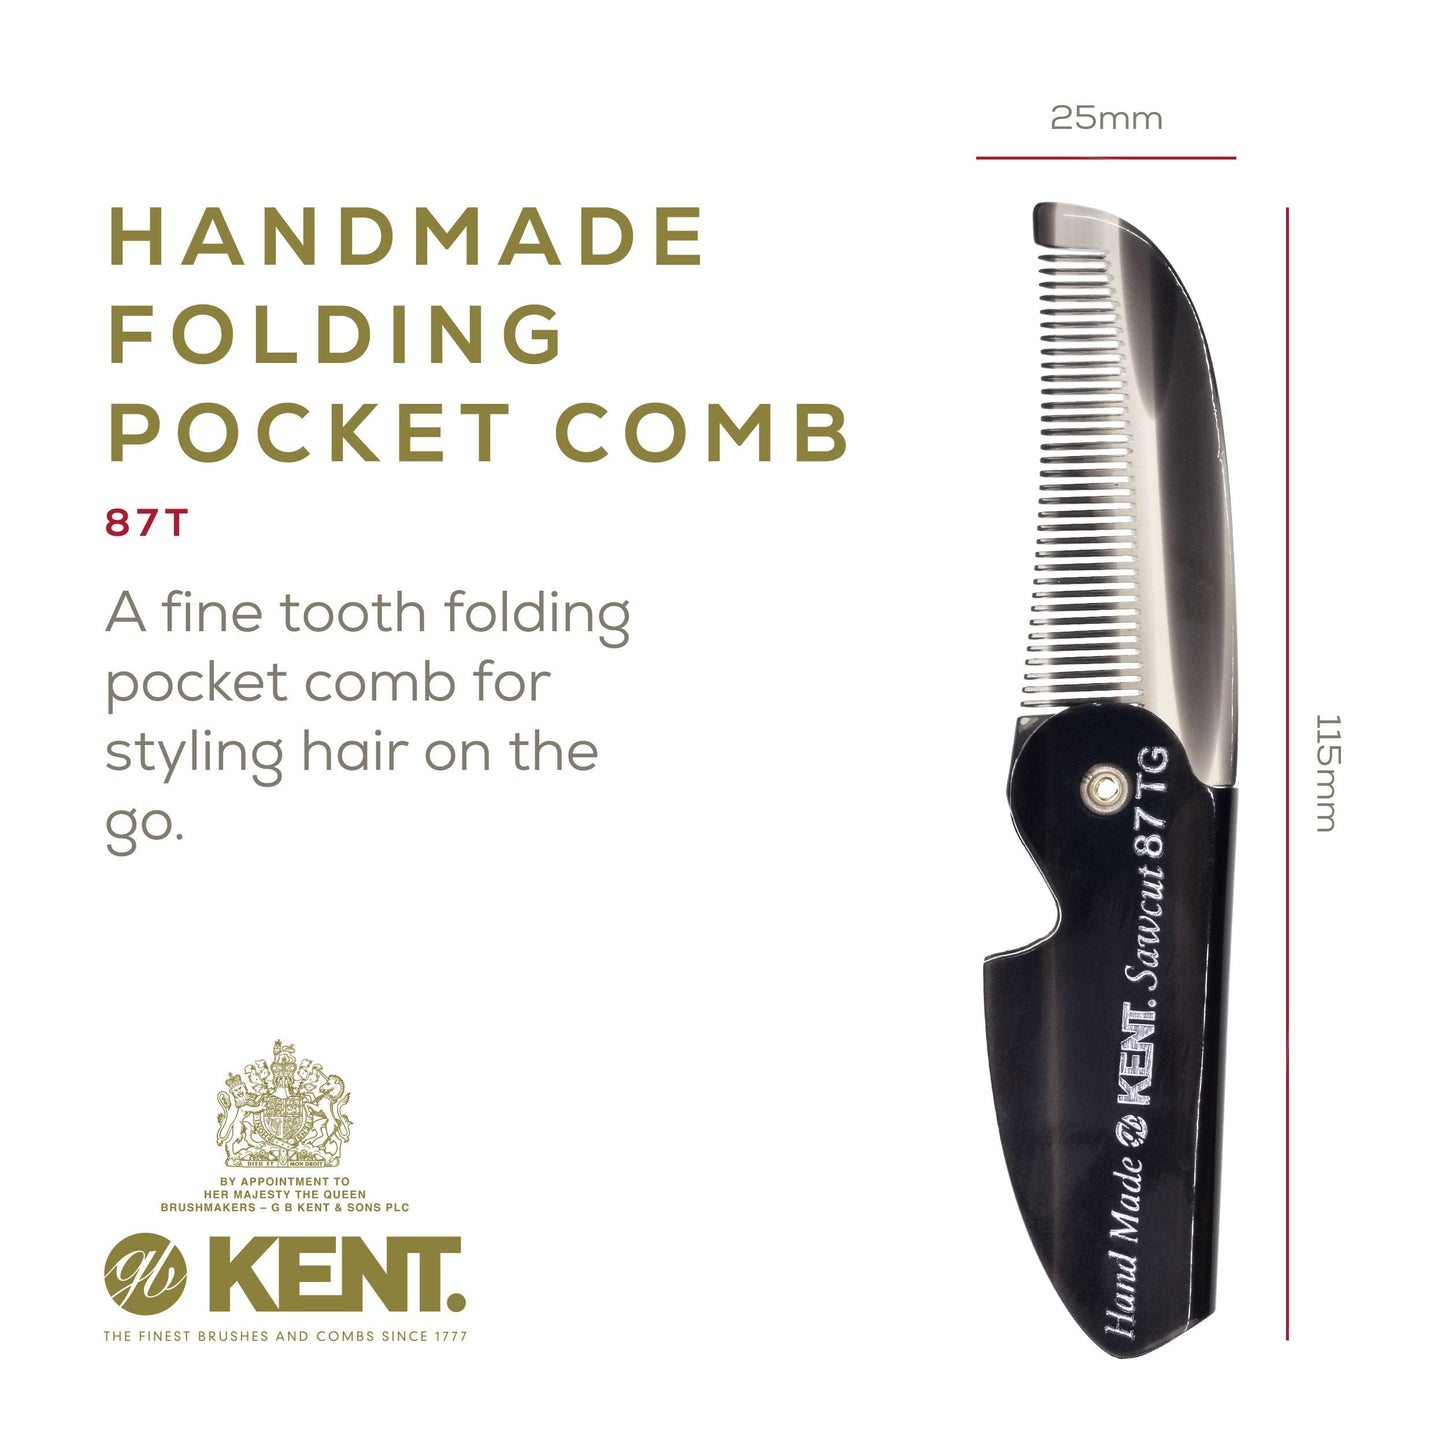 Kent 87T Graphite Handmade Folding Pocket Comb for Men, Fine Tooth Hair Comb Straightener for Everyday Grooming Styling Hair, Beard or Mustache, Saw Cut Hand Polished, Made in England